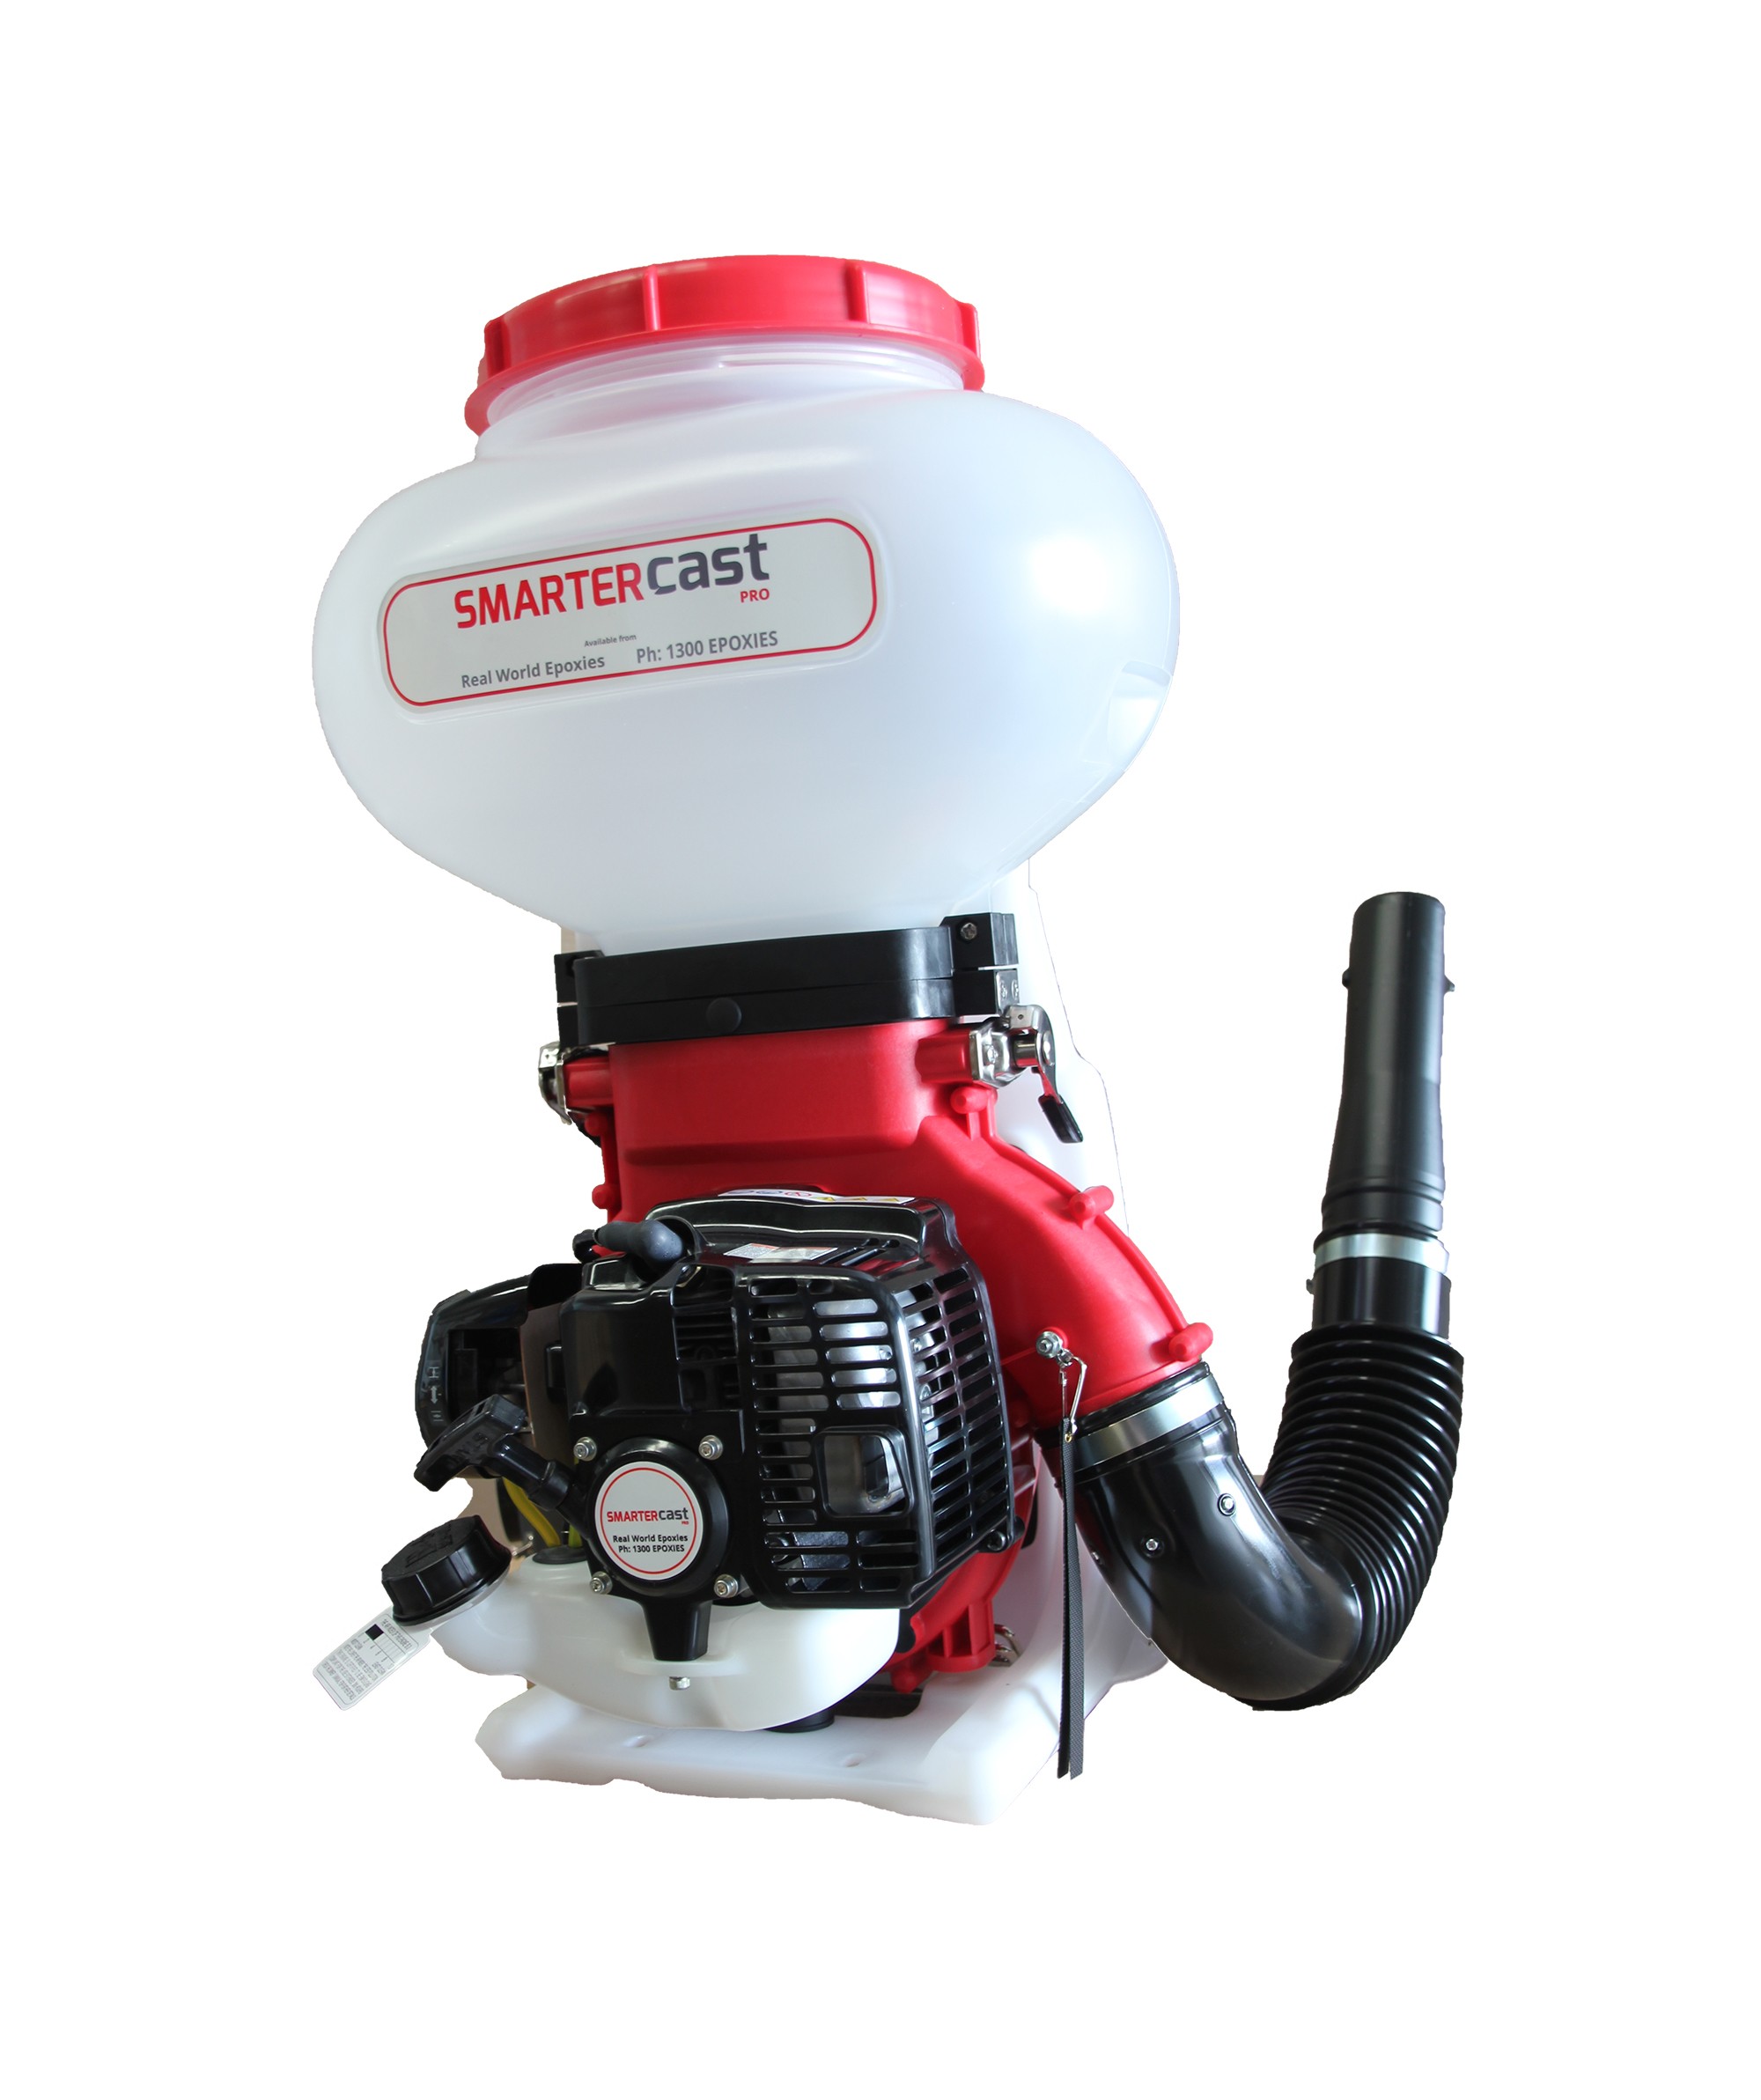 The petrol-powered broadcast machine offered by Real World Epoxies called SmarterCast Pro.